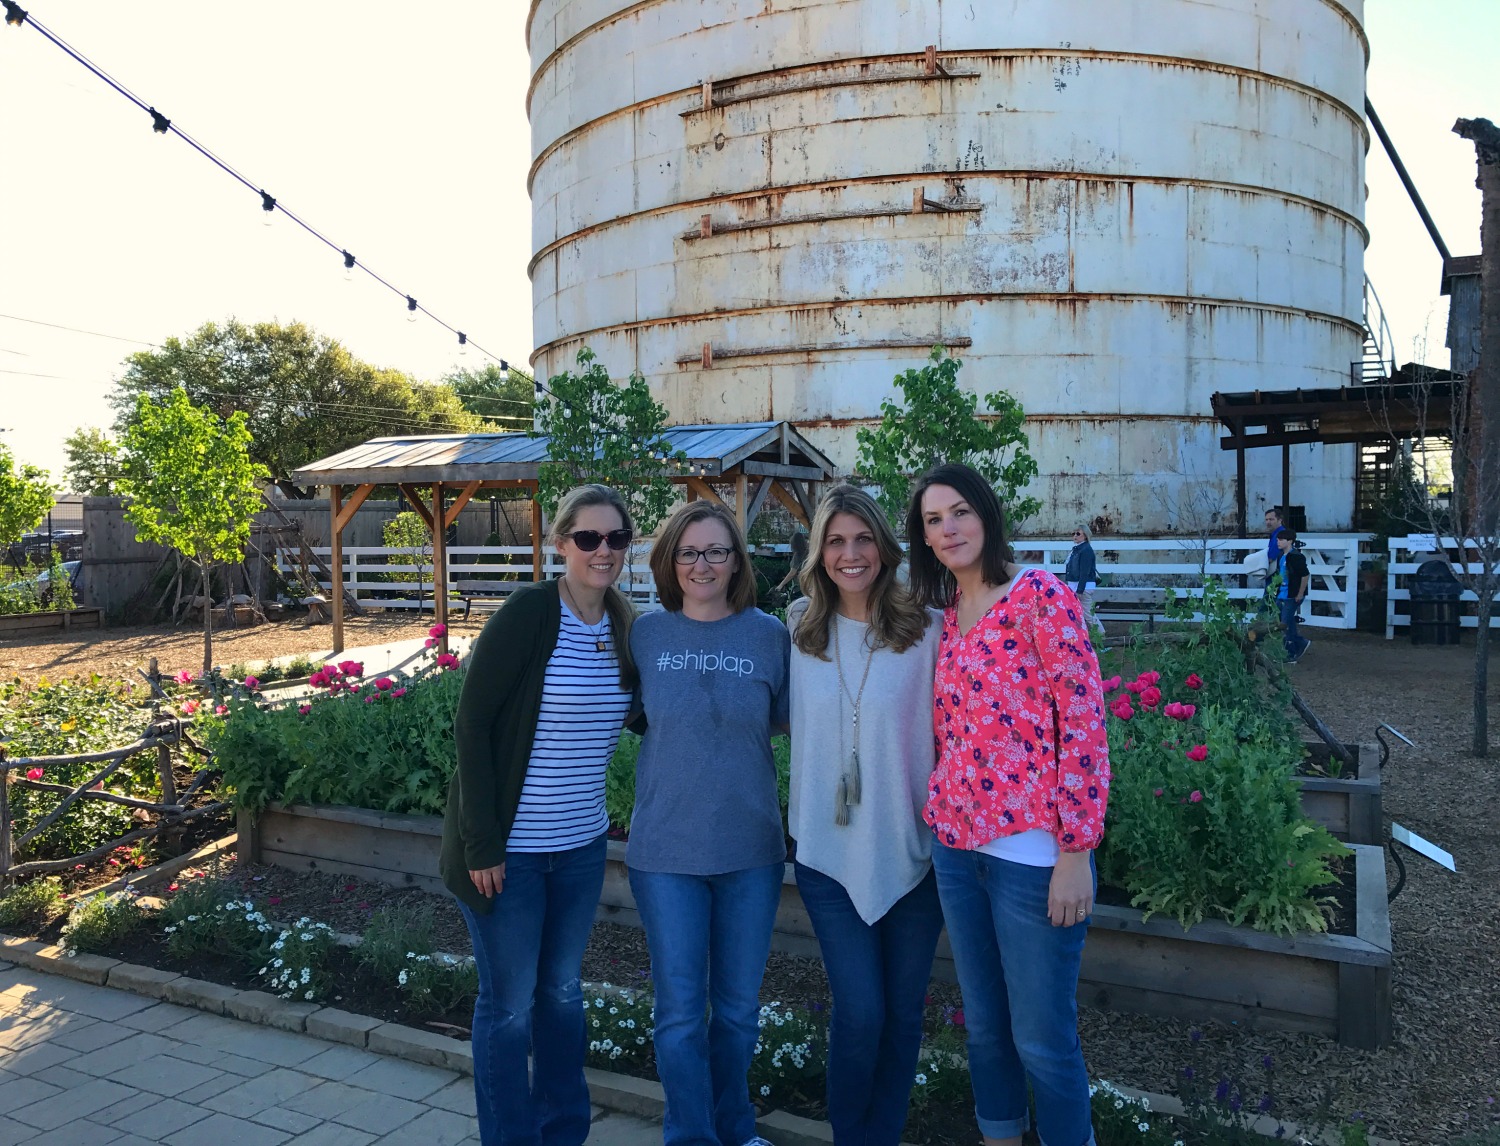 Heading to Waco for a girls weekend at Magnolia Market? Here's what you need to know to have an awesome Fixer Upper weekend!